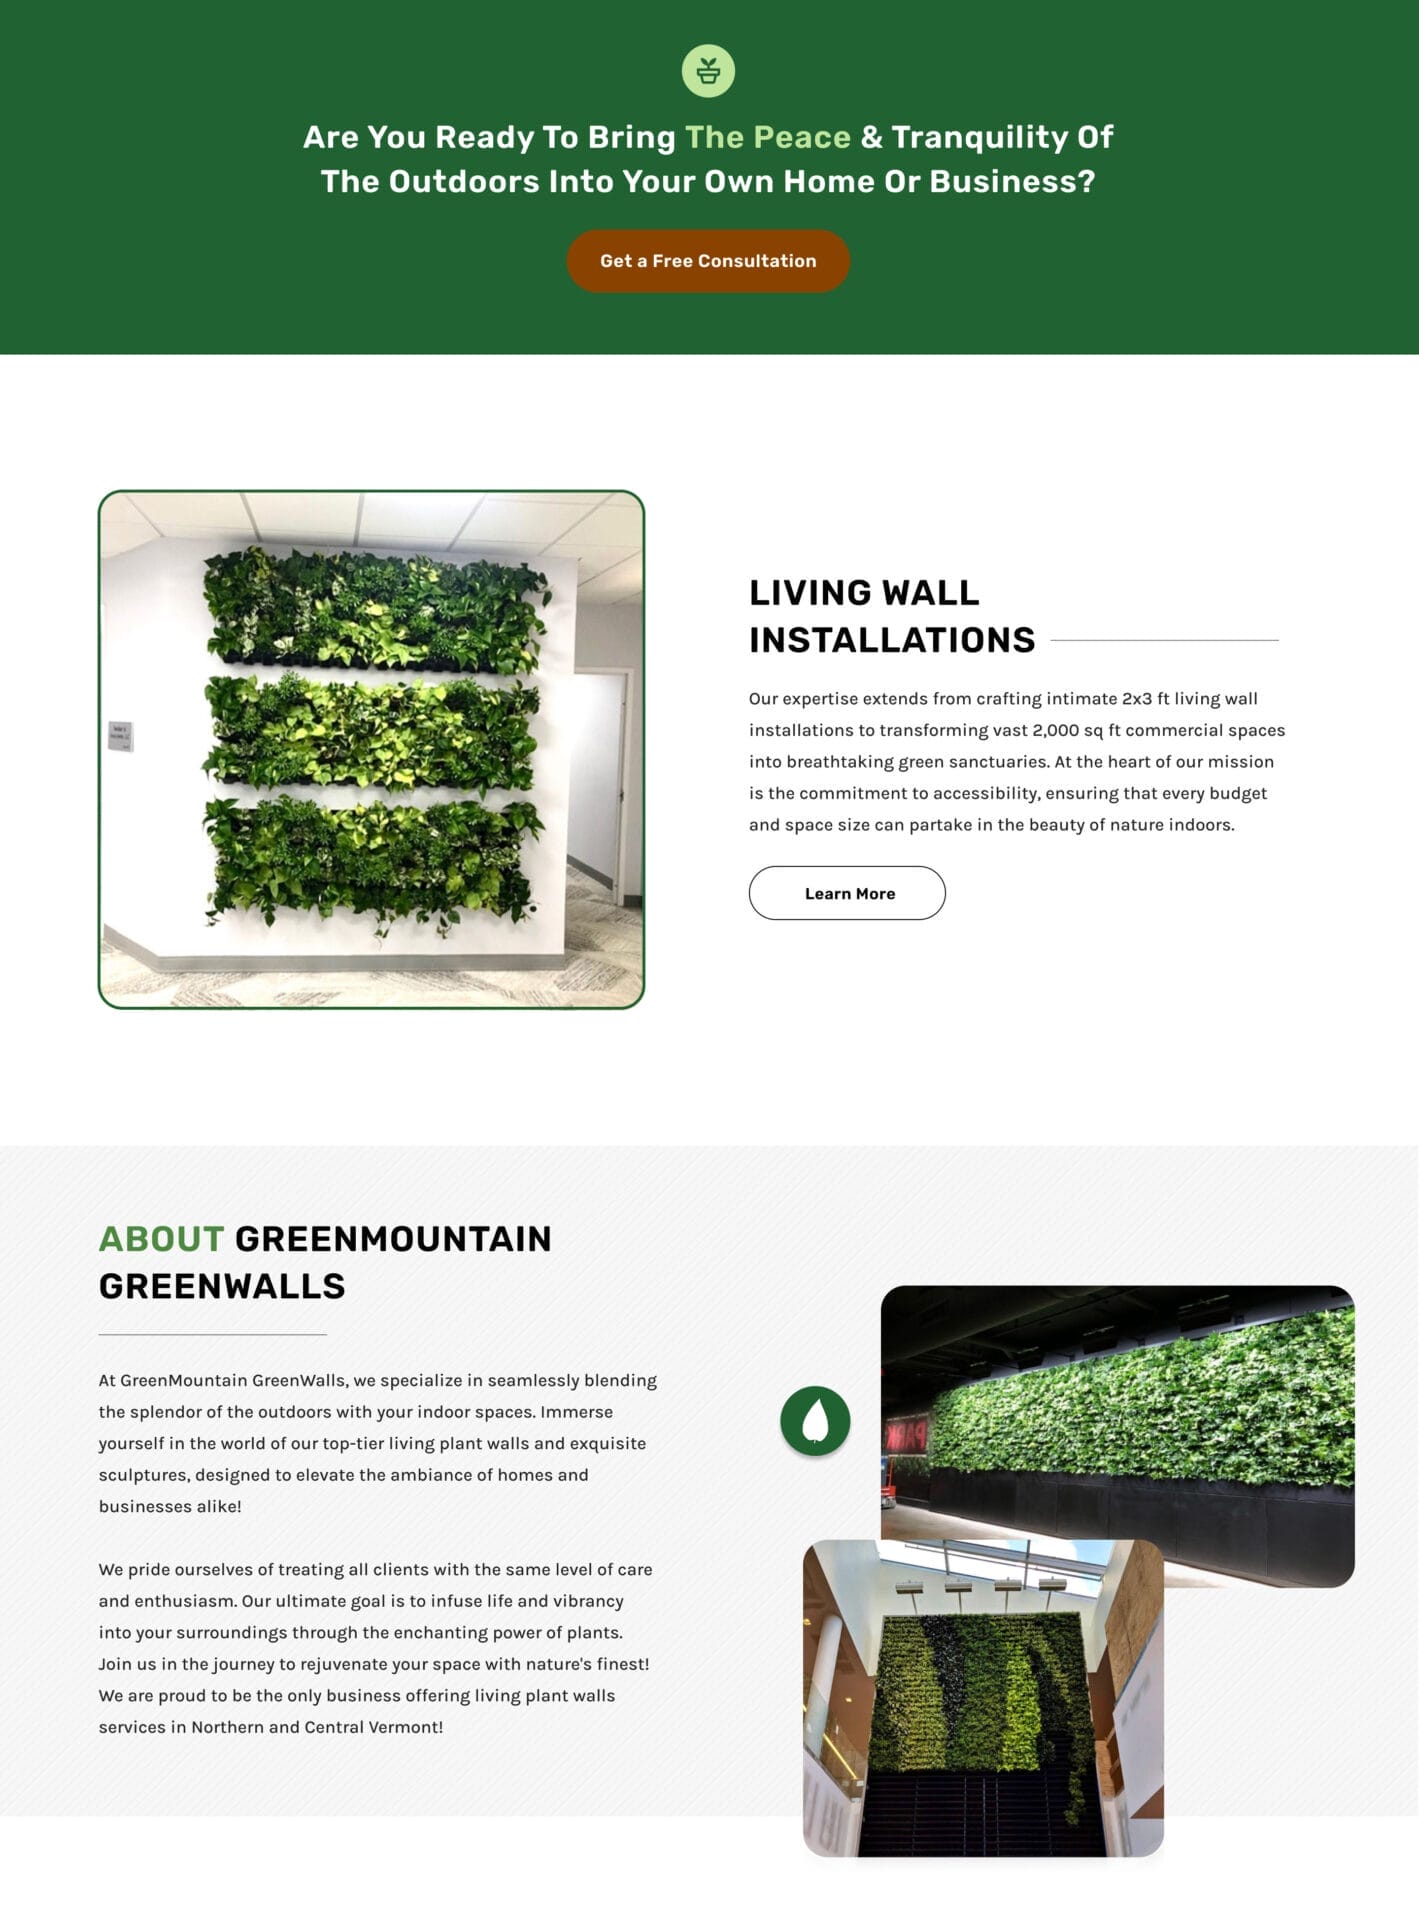 A website design for a green wall company.